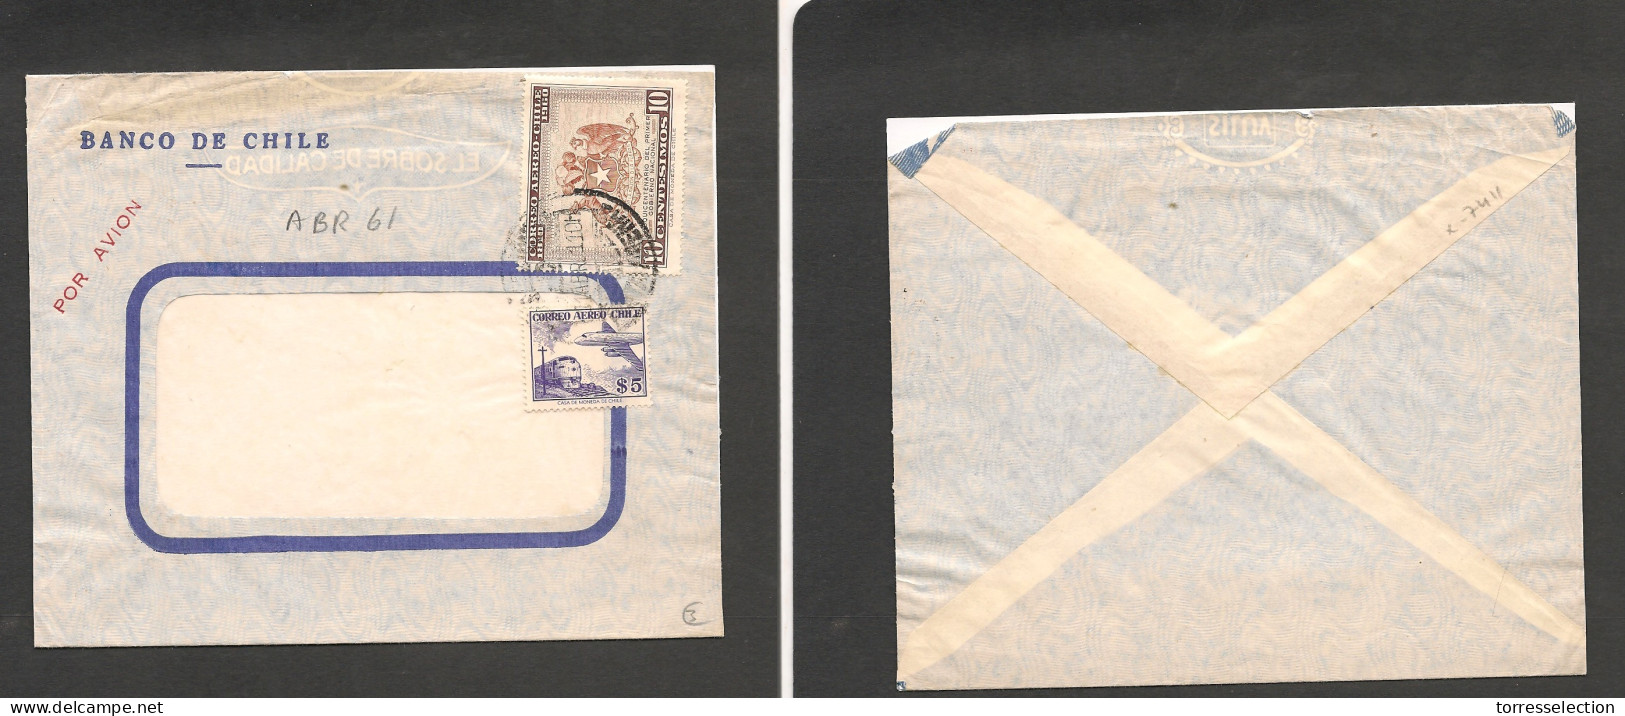 CHILE. Chile - Cover -1961 11 Abr Stgo To USA? Air Fkd Env $15 Rate Ex-Prof West UK Airmails Coll.- . Easy Deal. XSALE. - Chile